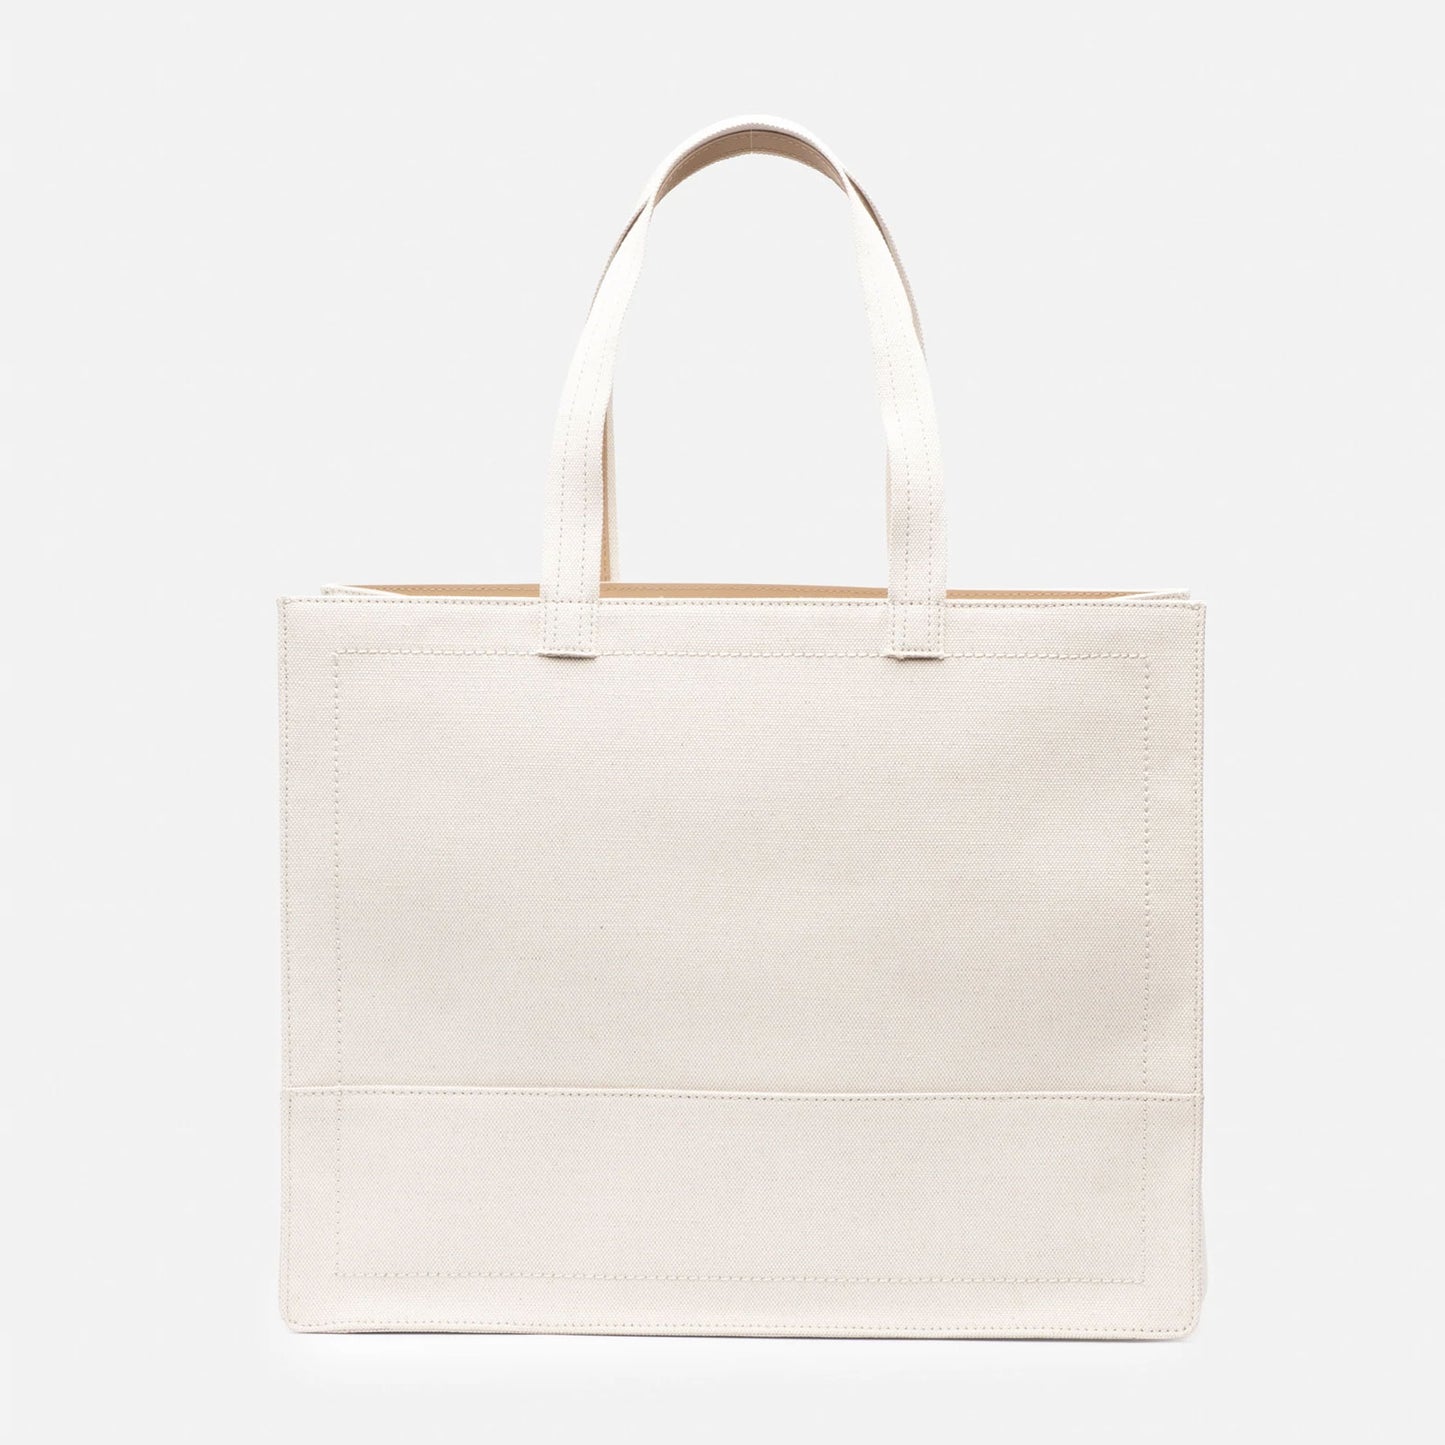 The Surplus Tote in Natural / Camel